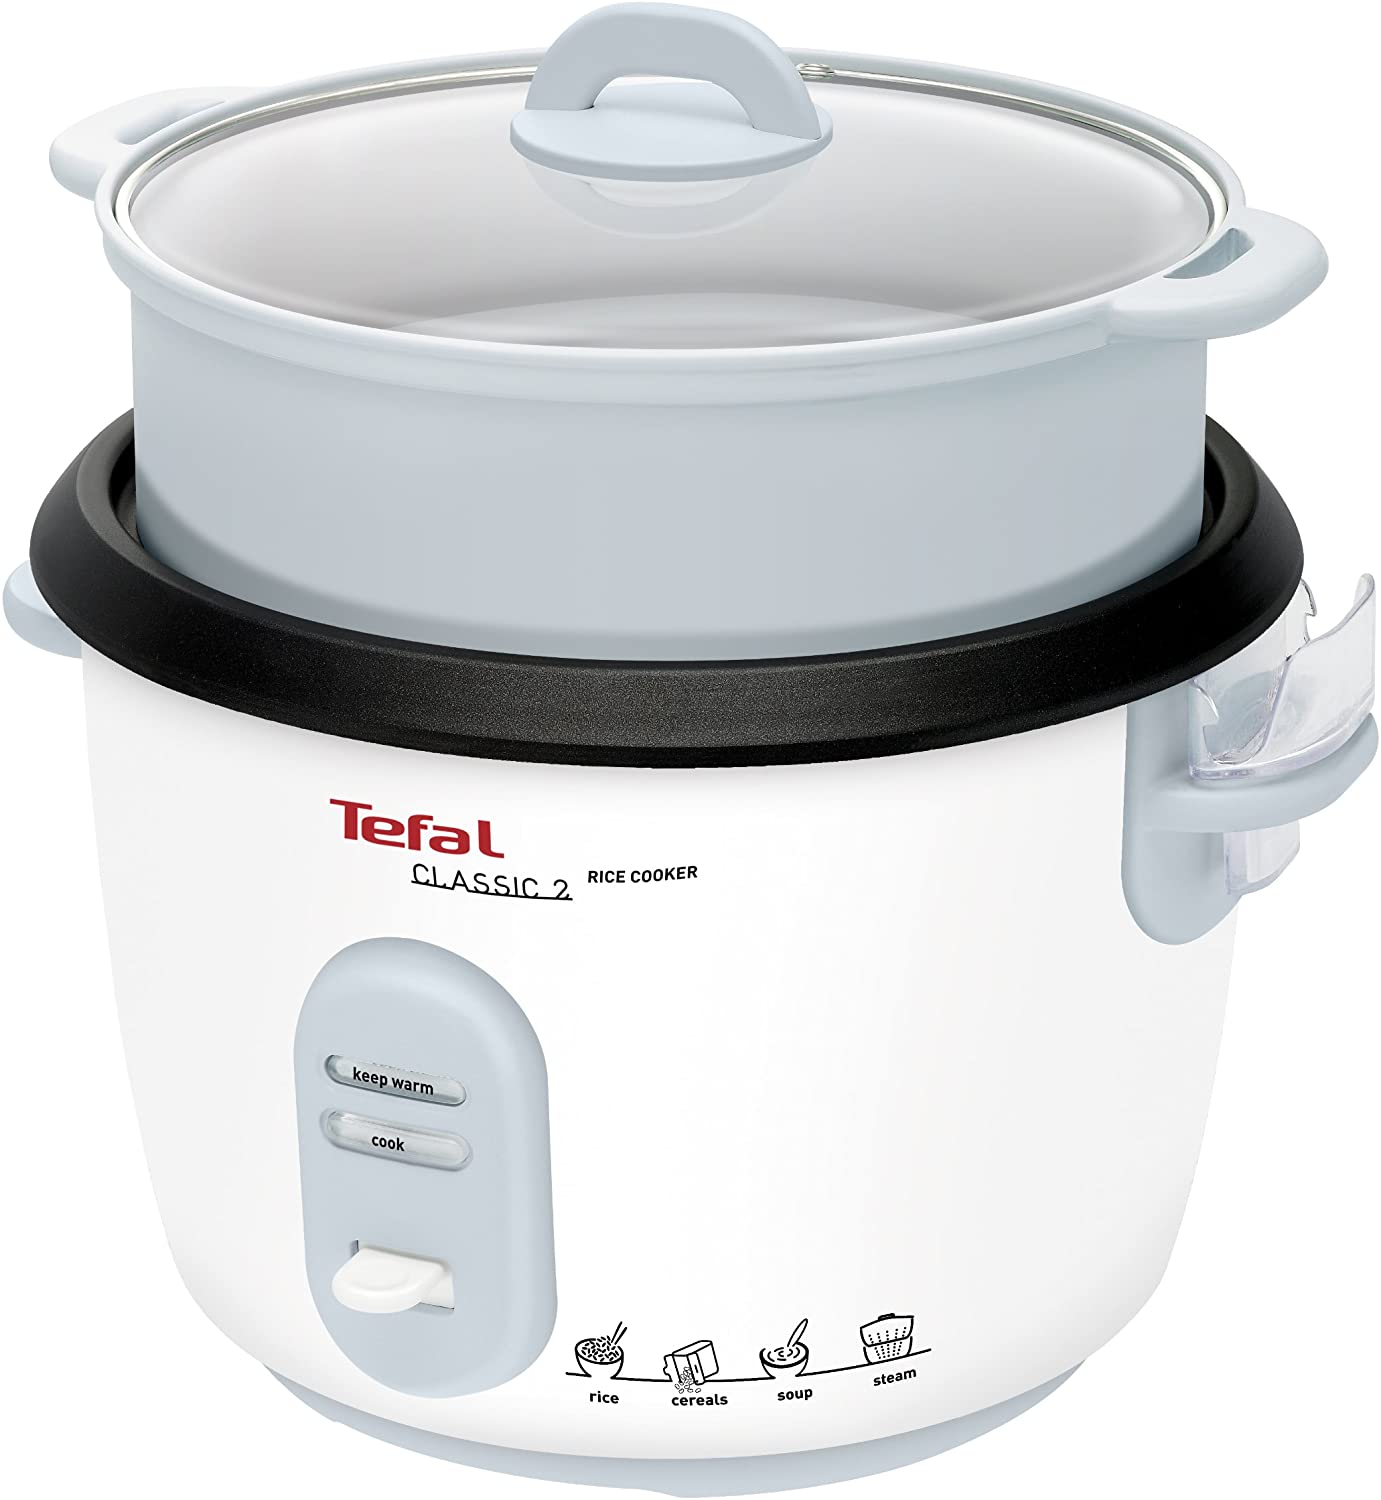 Tefal RK1011 Rice Cooker | Preset Cooking Programs | 10 Cups Capacity (5L) | Automatic Warming Function | Manual Adjustments | Perfect Cooking Rice | Steam Basket Included | 700W